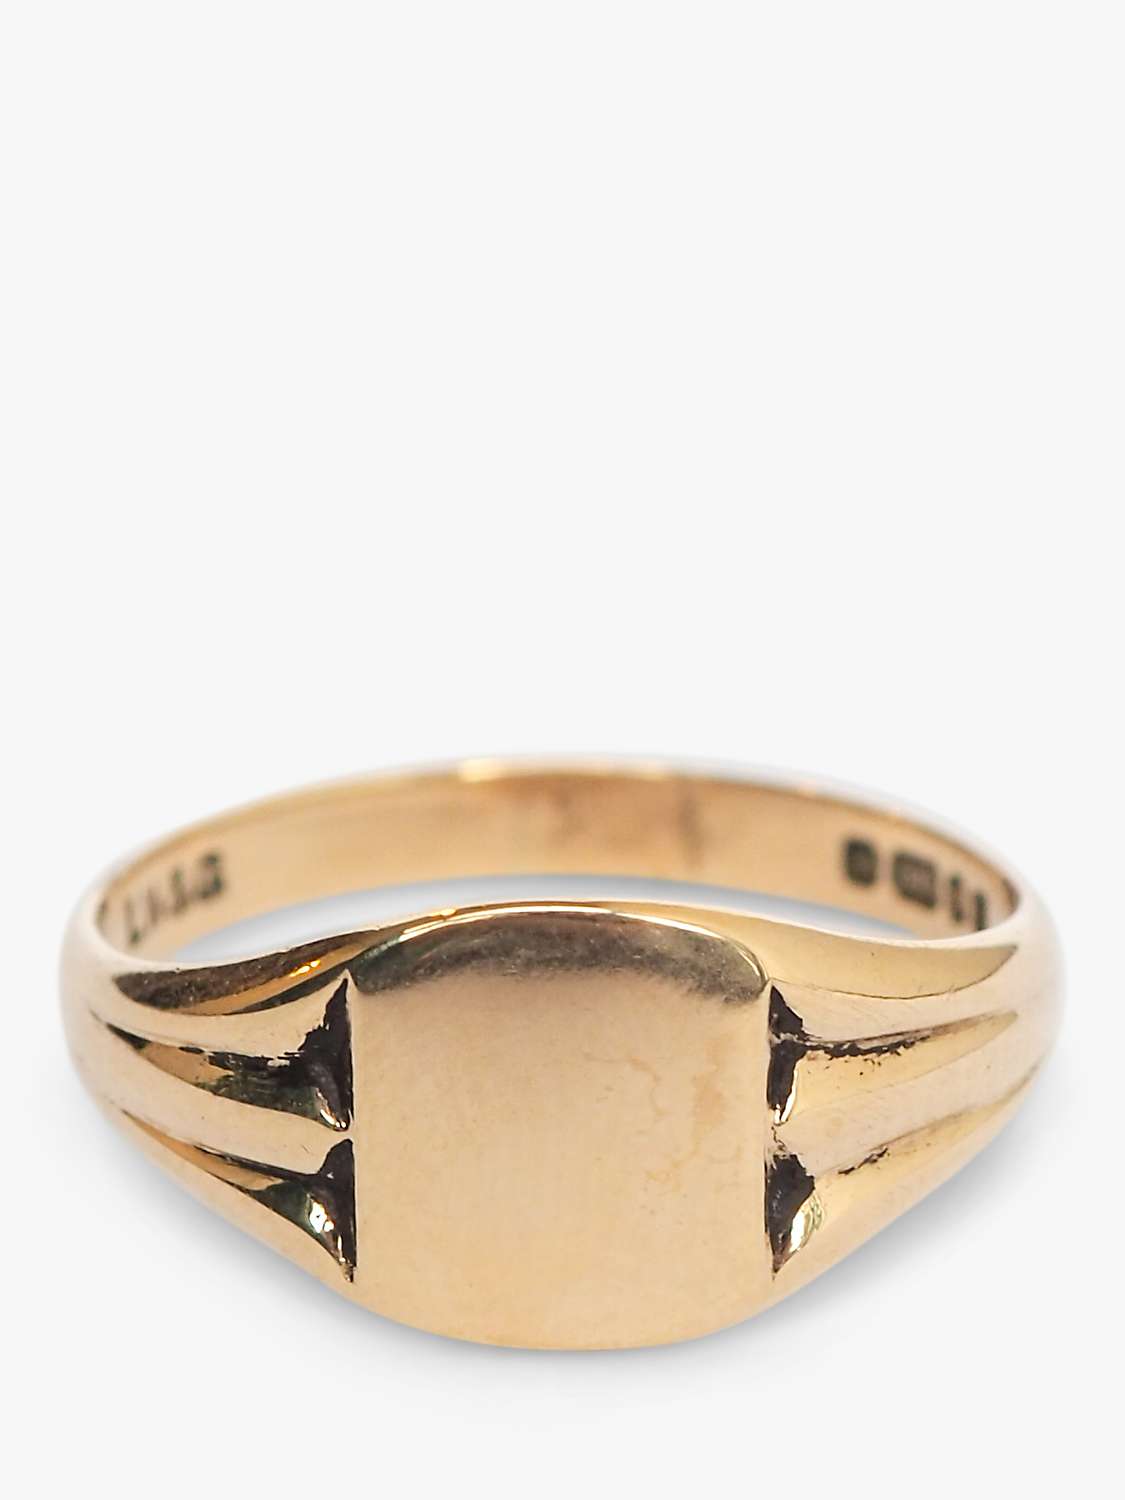 Buy L & T Heirlooms Second Hand 9ct Yellow Gold Signet Ring, Dated Circa 1975, Gold Online at johnlewis.com